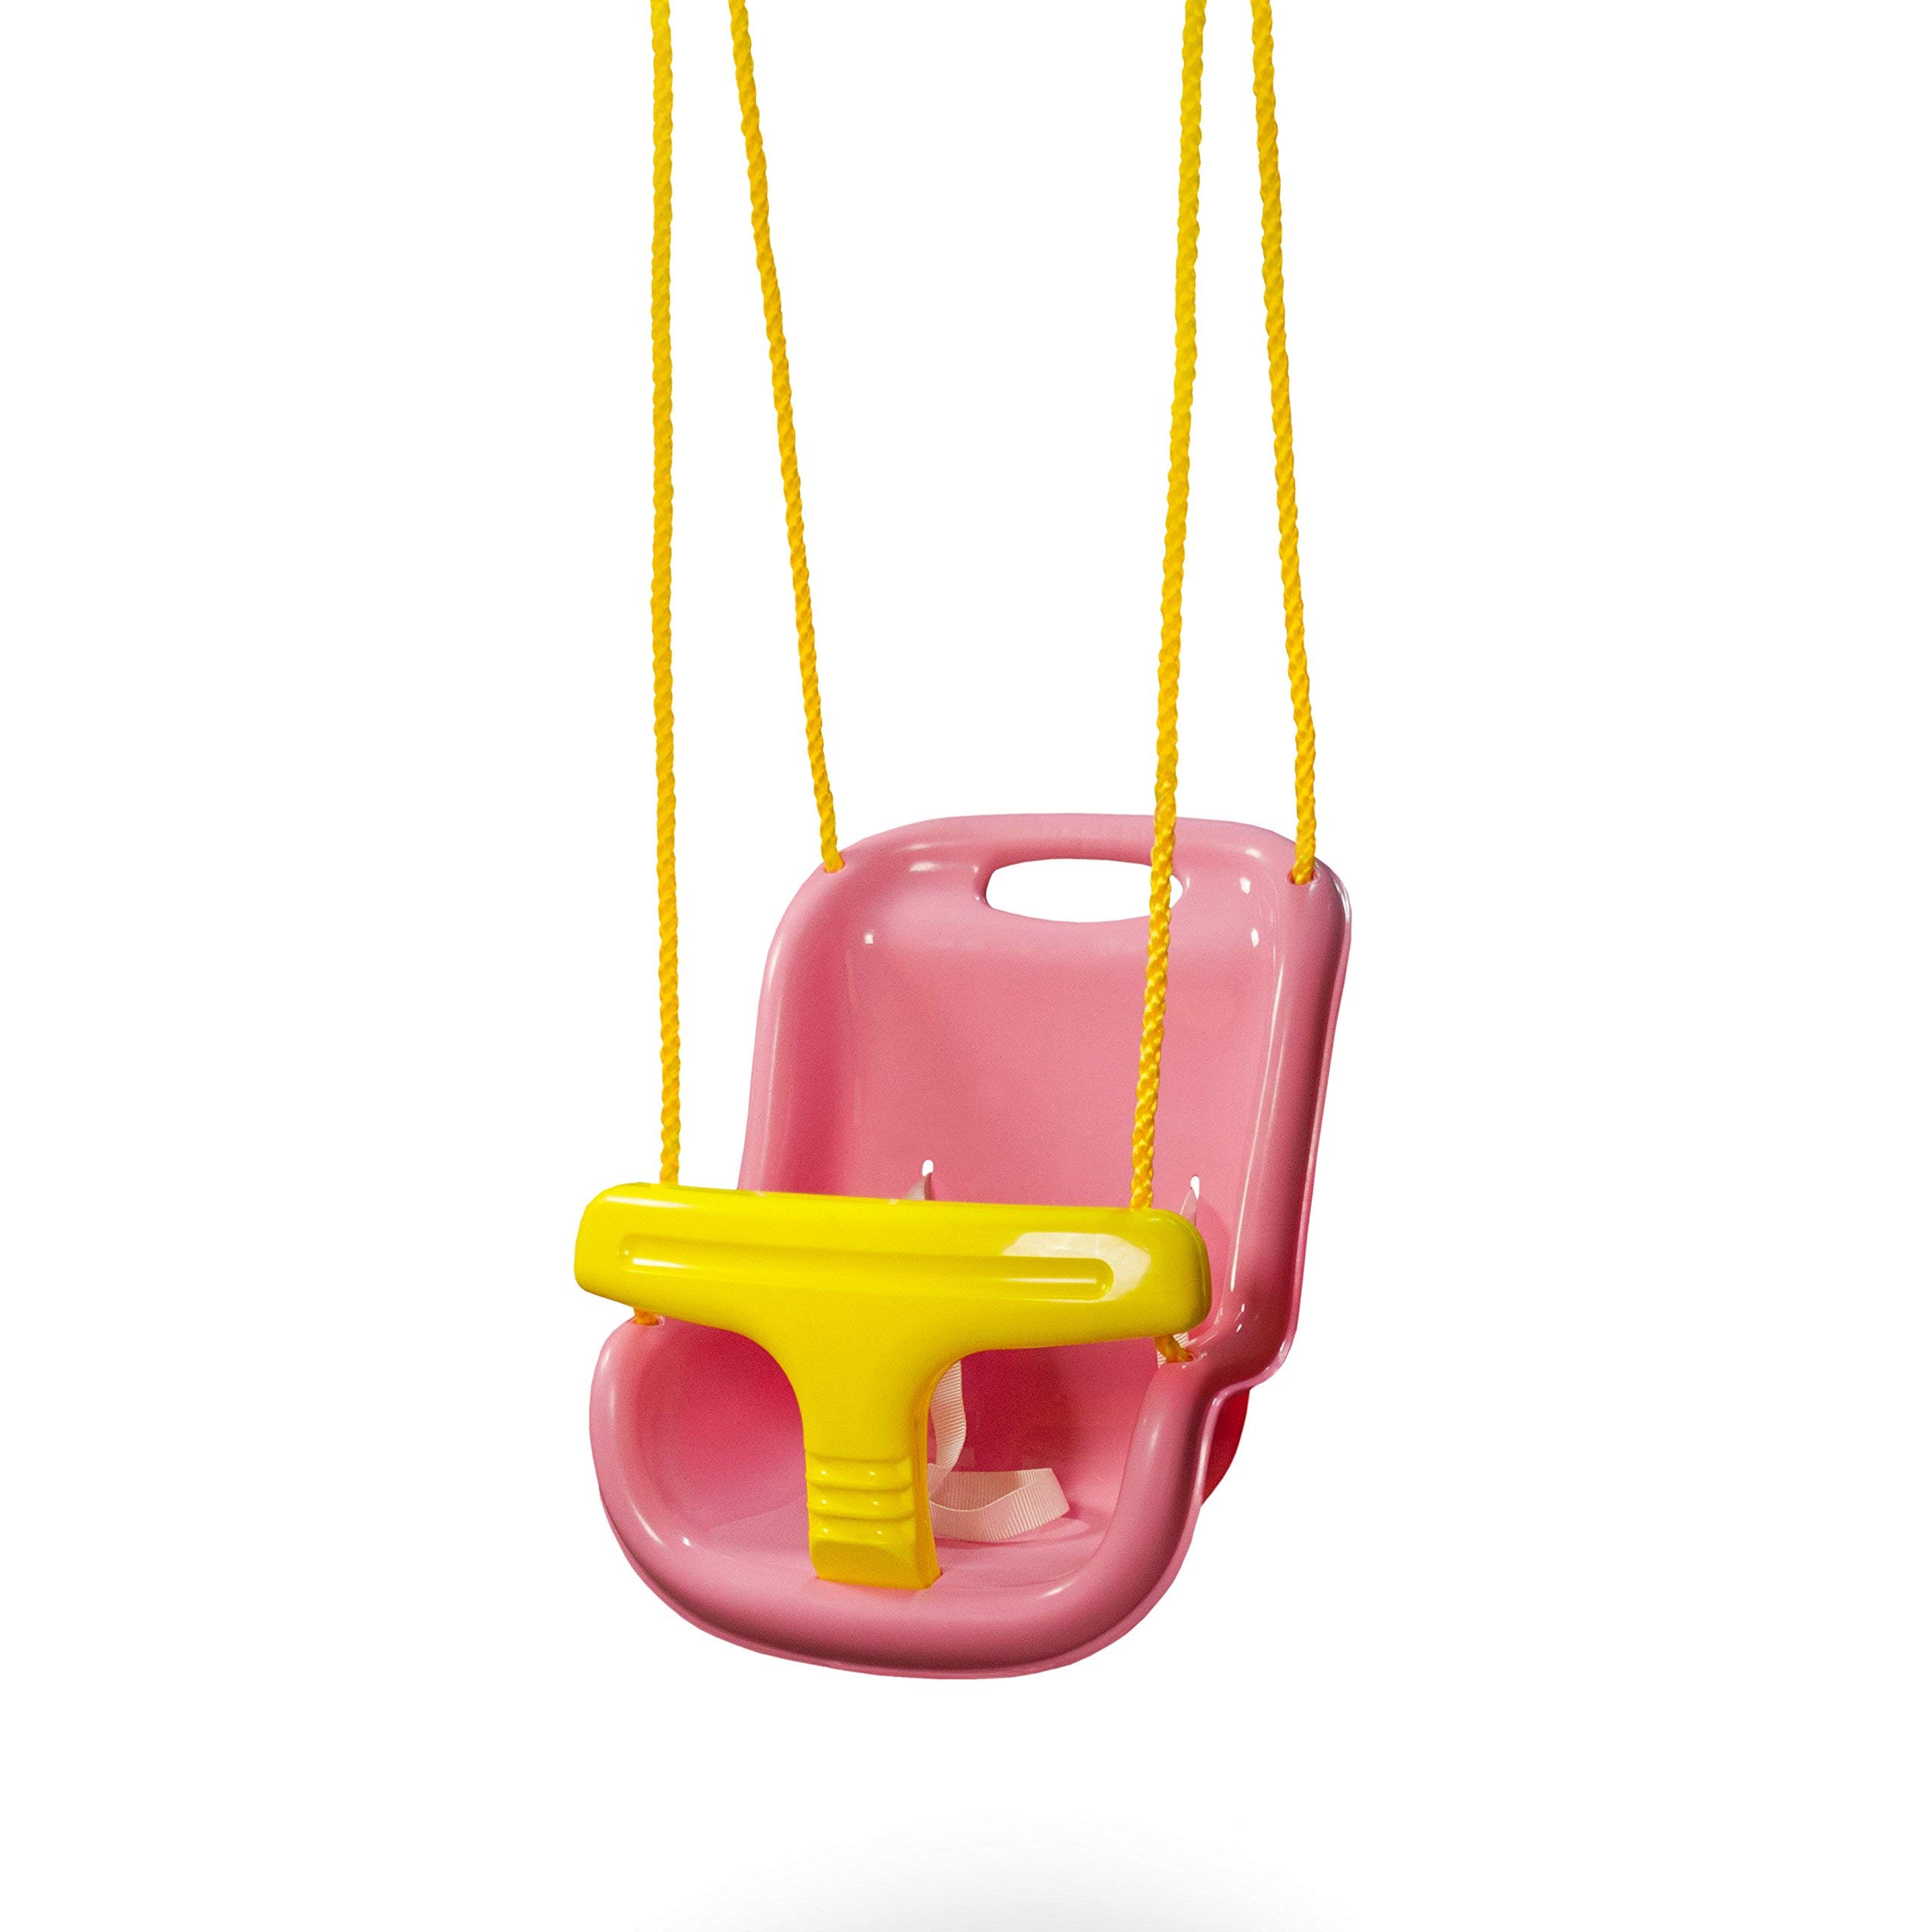 Gorilla Playsets 04-0032-PK High Back Plastic Infant Swing with Yellow T bar & Rope, Pink with Yellow